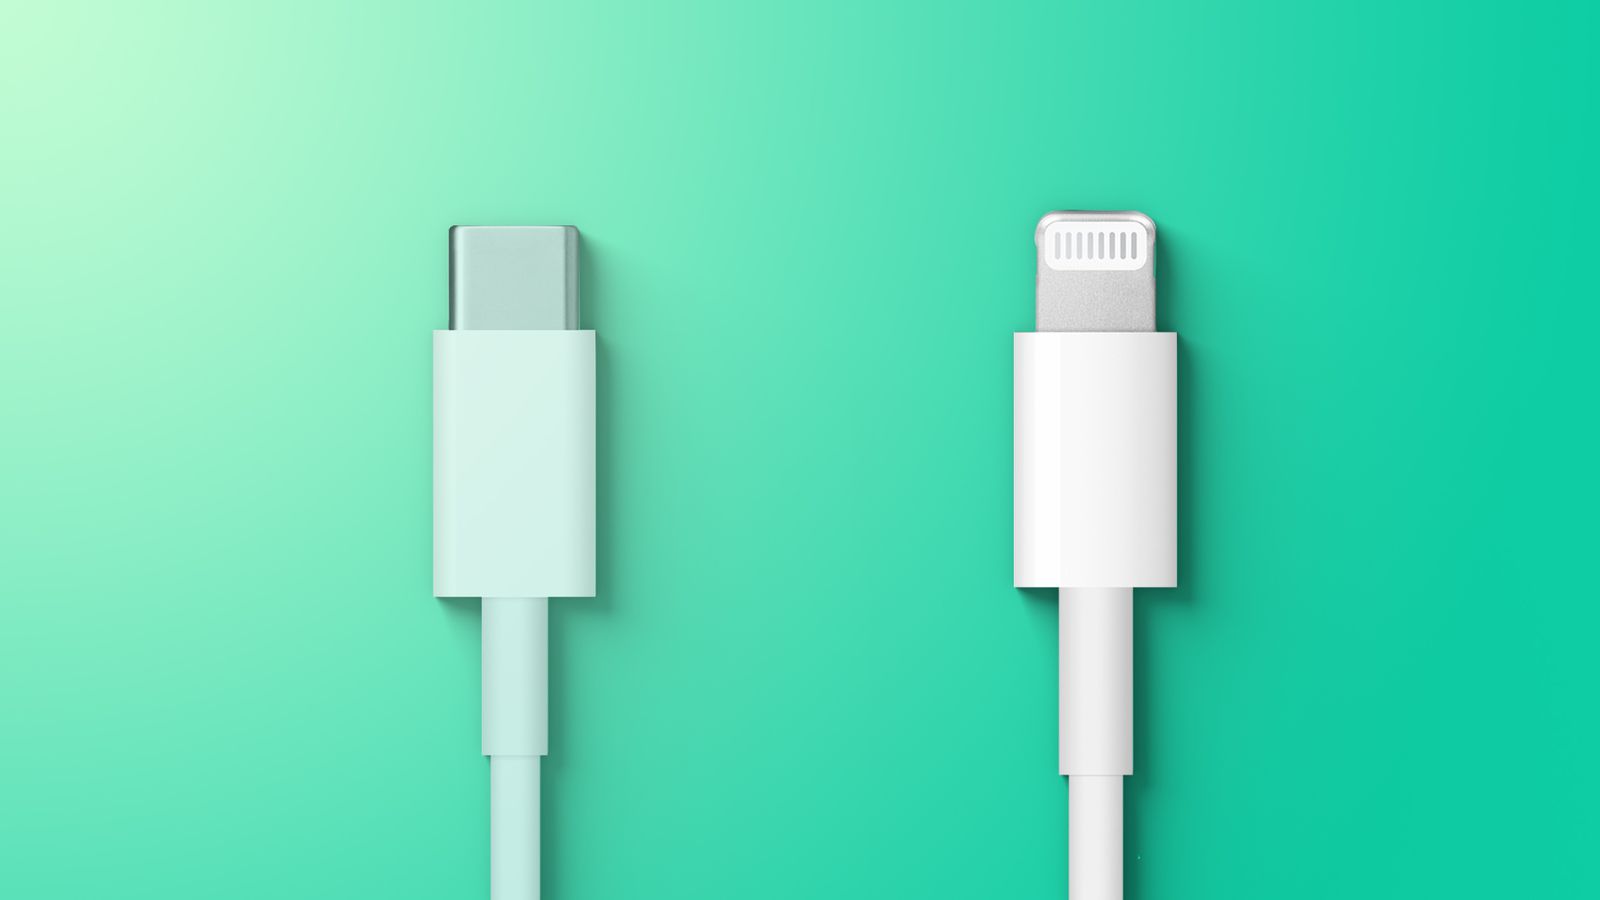 Thanks to the EU's New Proposal, Your Next iPhone Could have a USB-C Port.